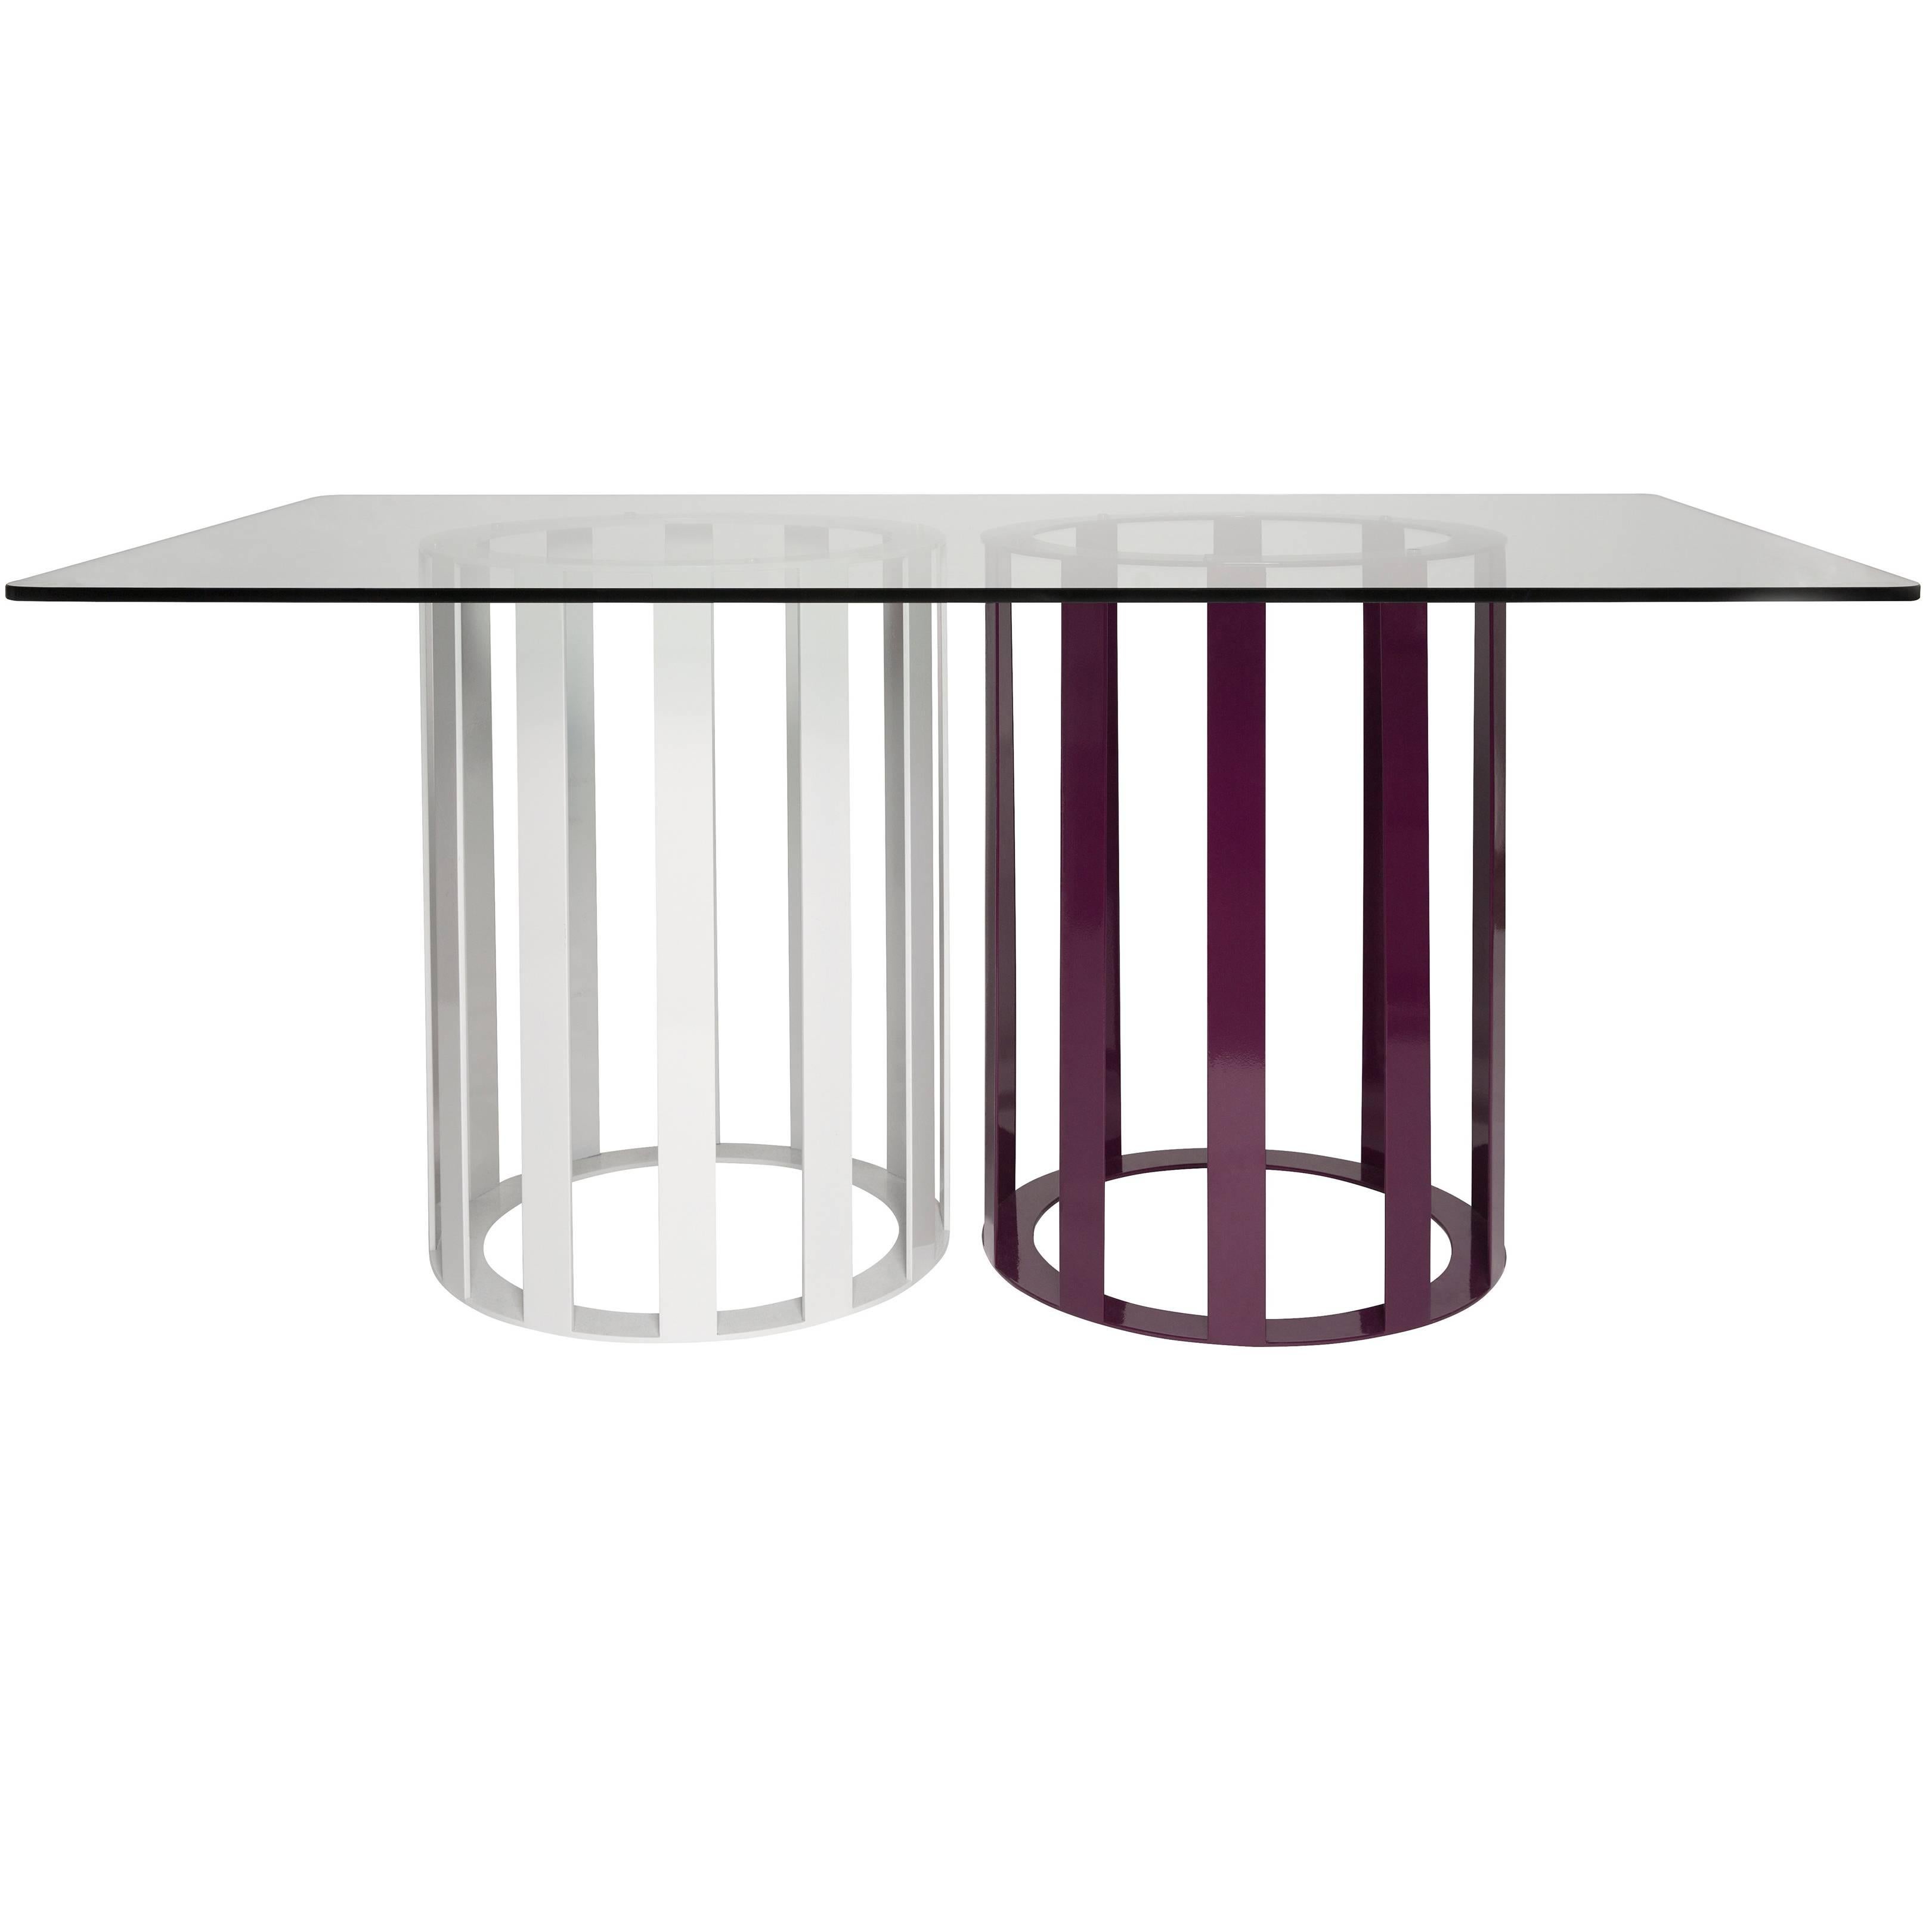  Flux Rectangle Dining Table by Pieces, Modern Customizable in Stone Wood Glass